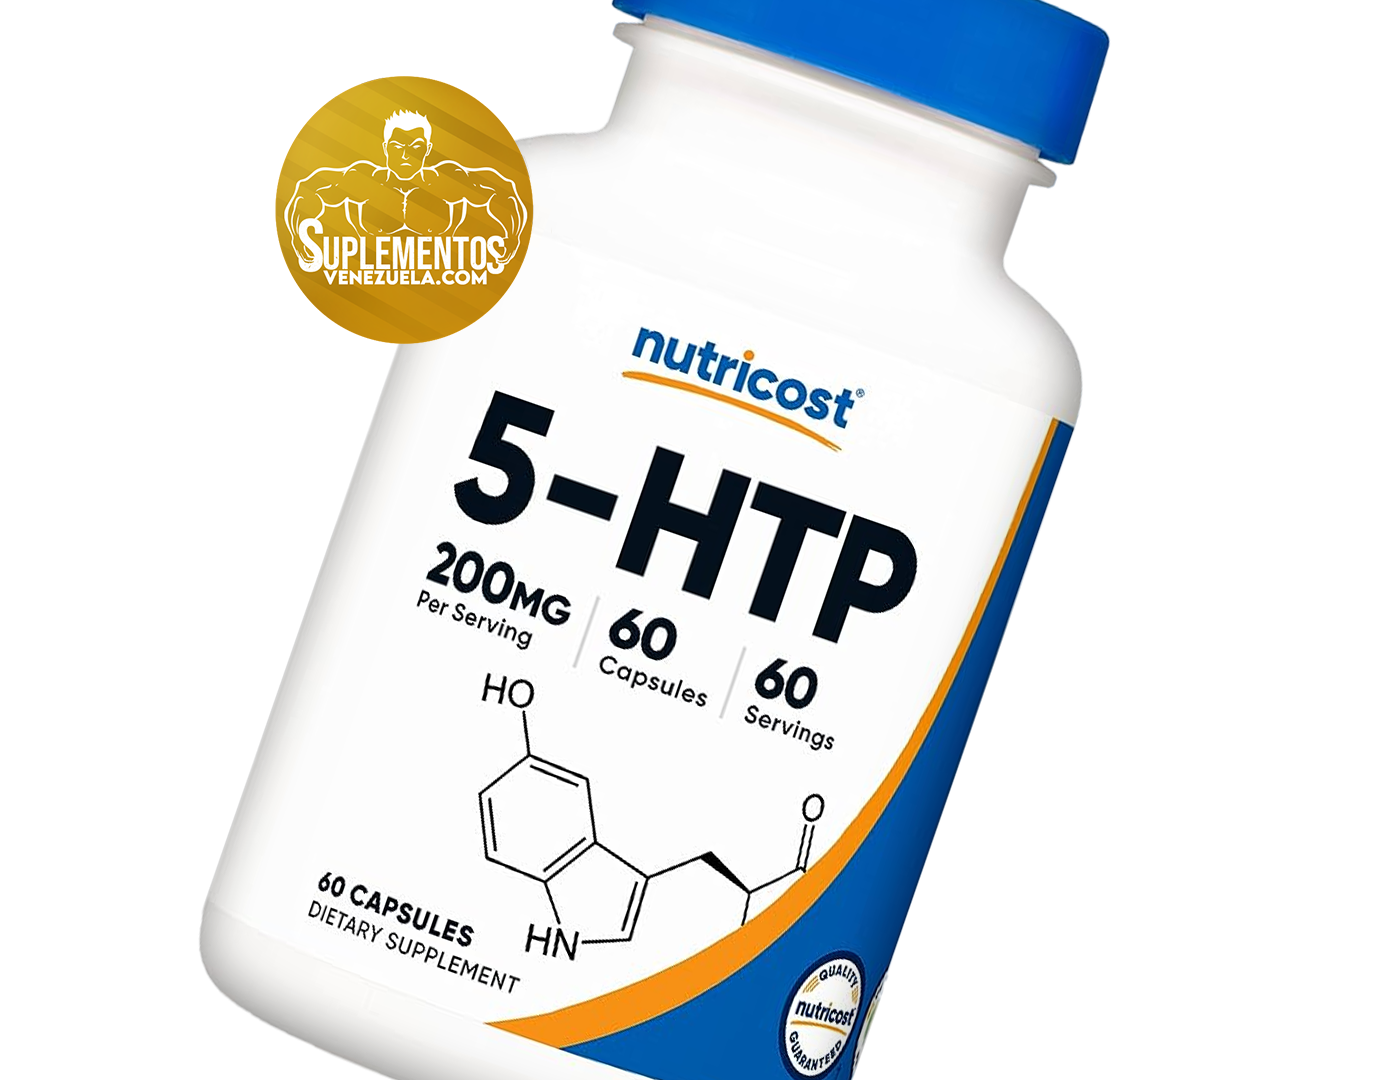 SV - nutricost 5-HTP Capsules (200 MG) (60 Capsules).png